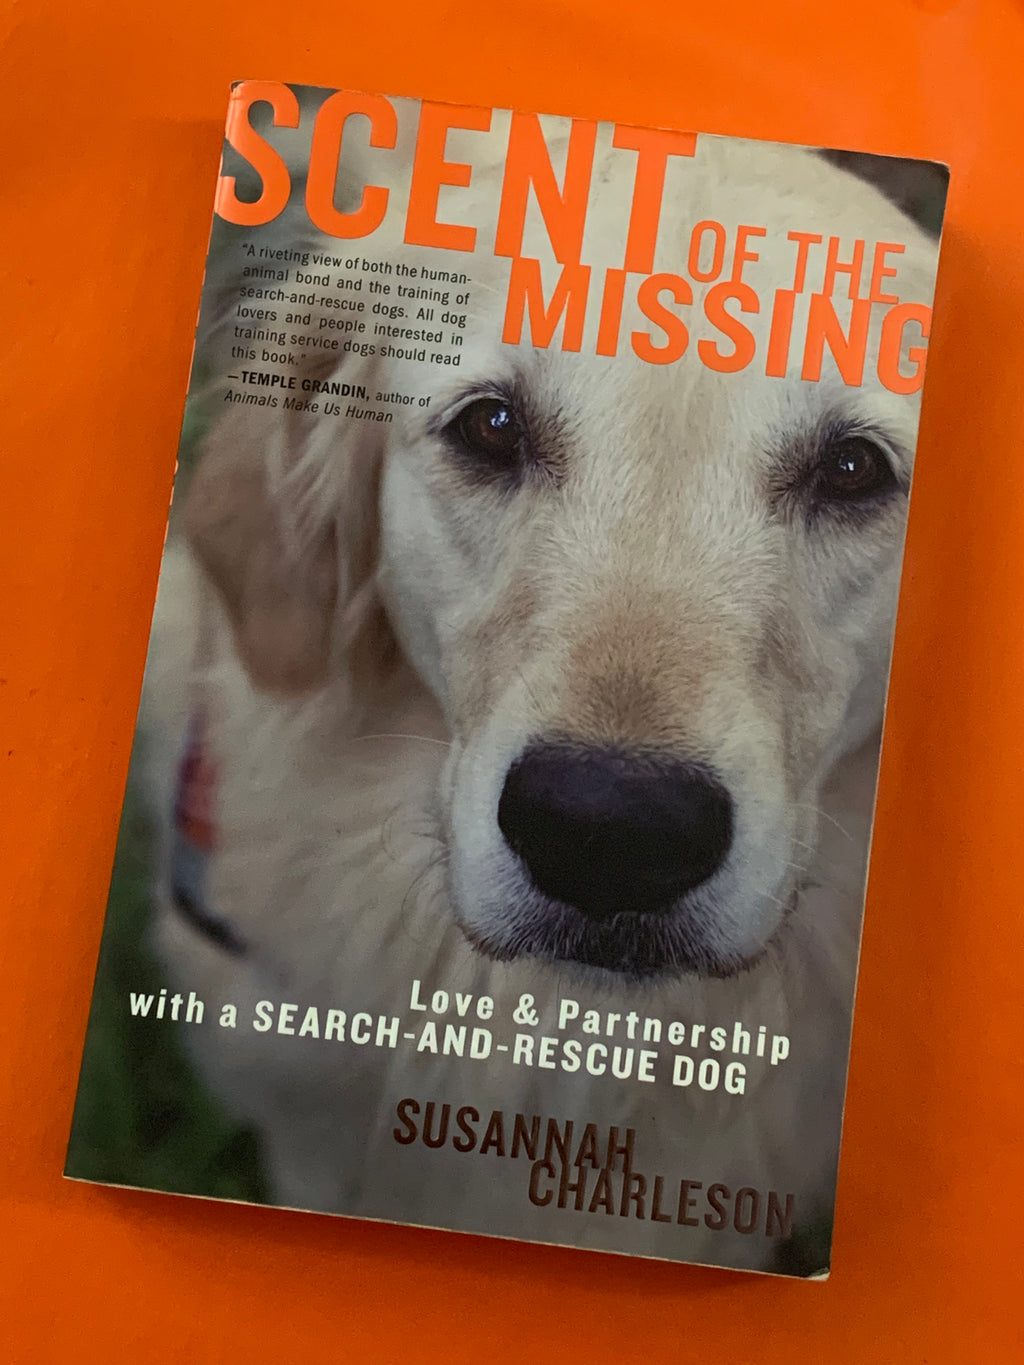 Scent of the Missing: Love & Partnership with a Search-and-Rescue Dog- By Susannah Charleson